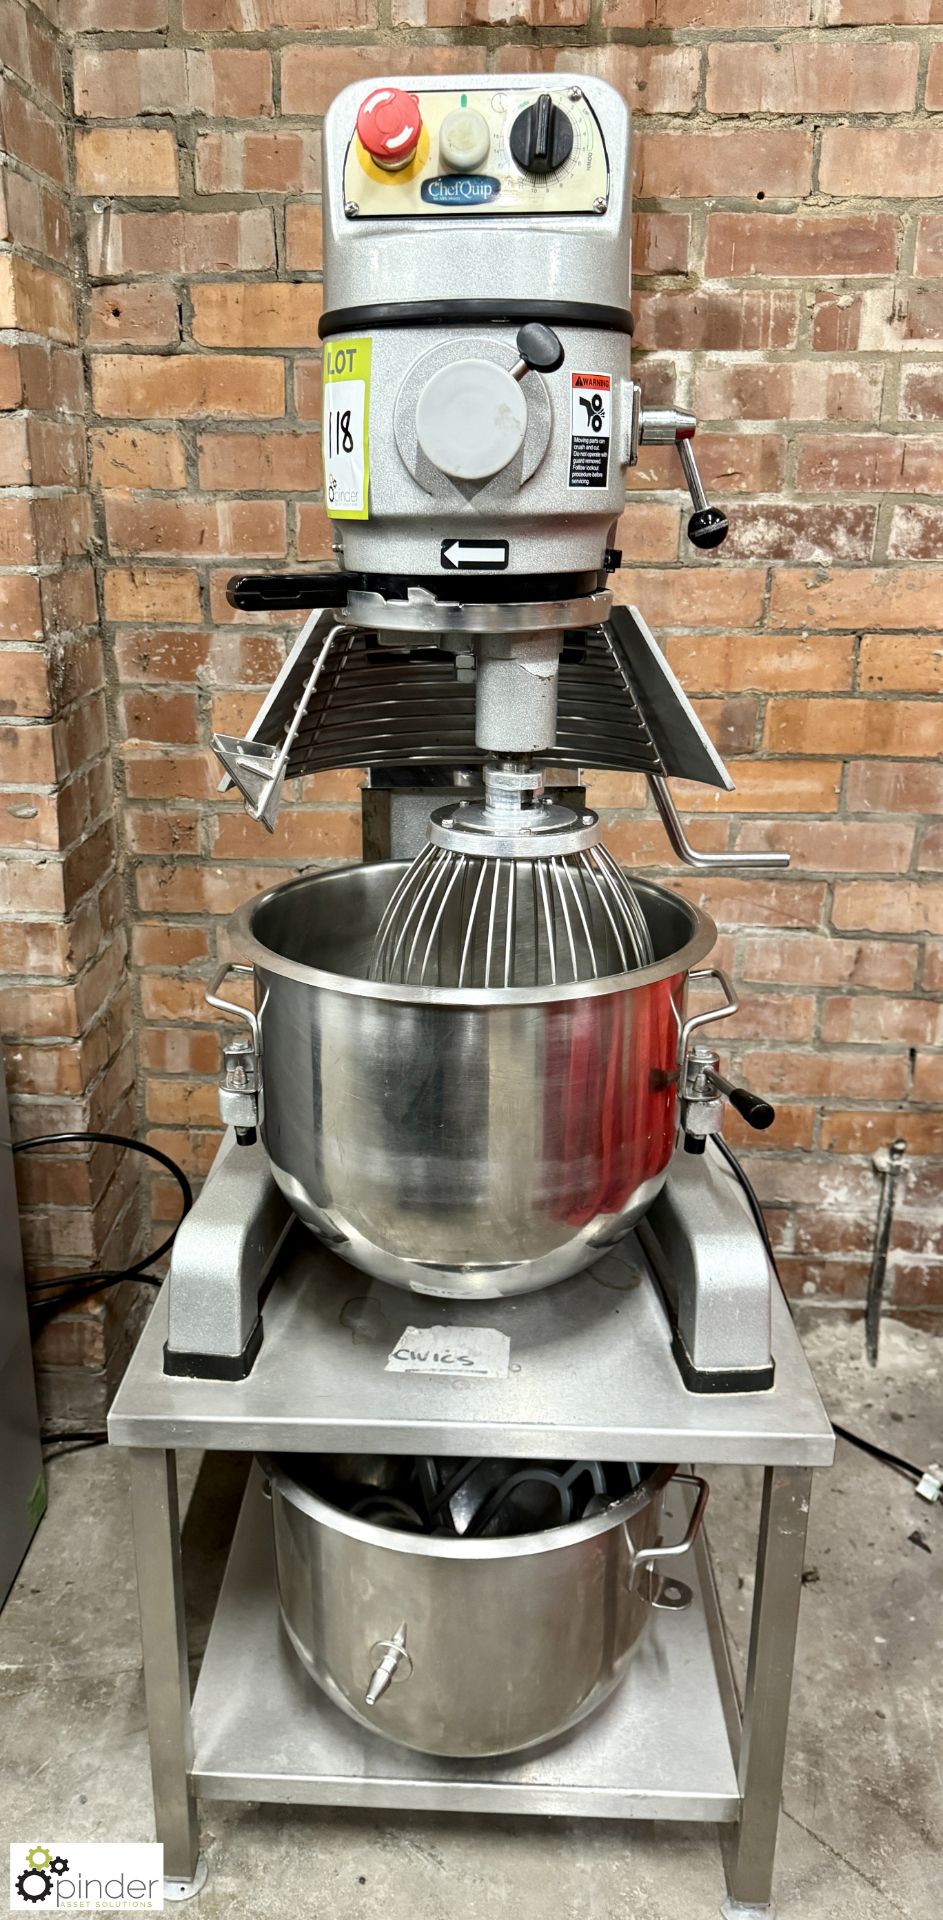 Spar Food Machinery SP-22HA-B Planetary Food Mixer, 240volts, with 2 bowls, whisk, dough hook, - Image 2 of 8